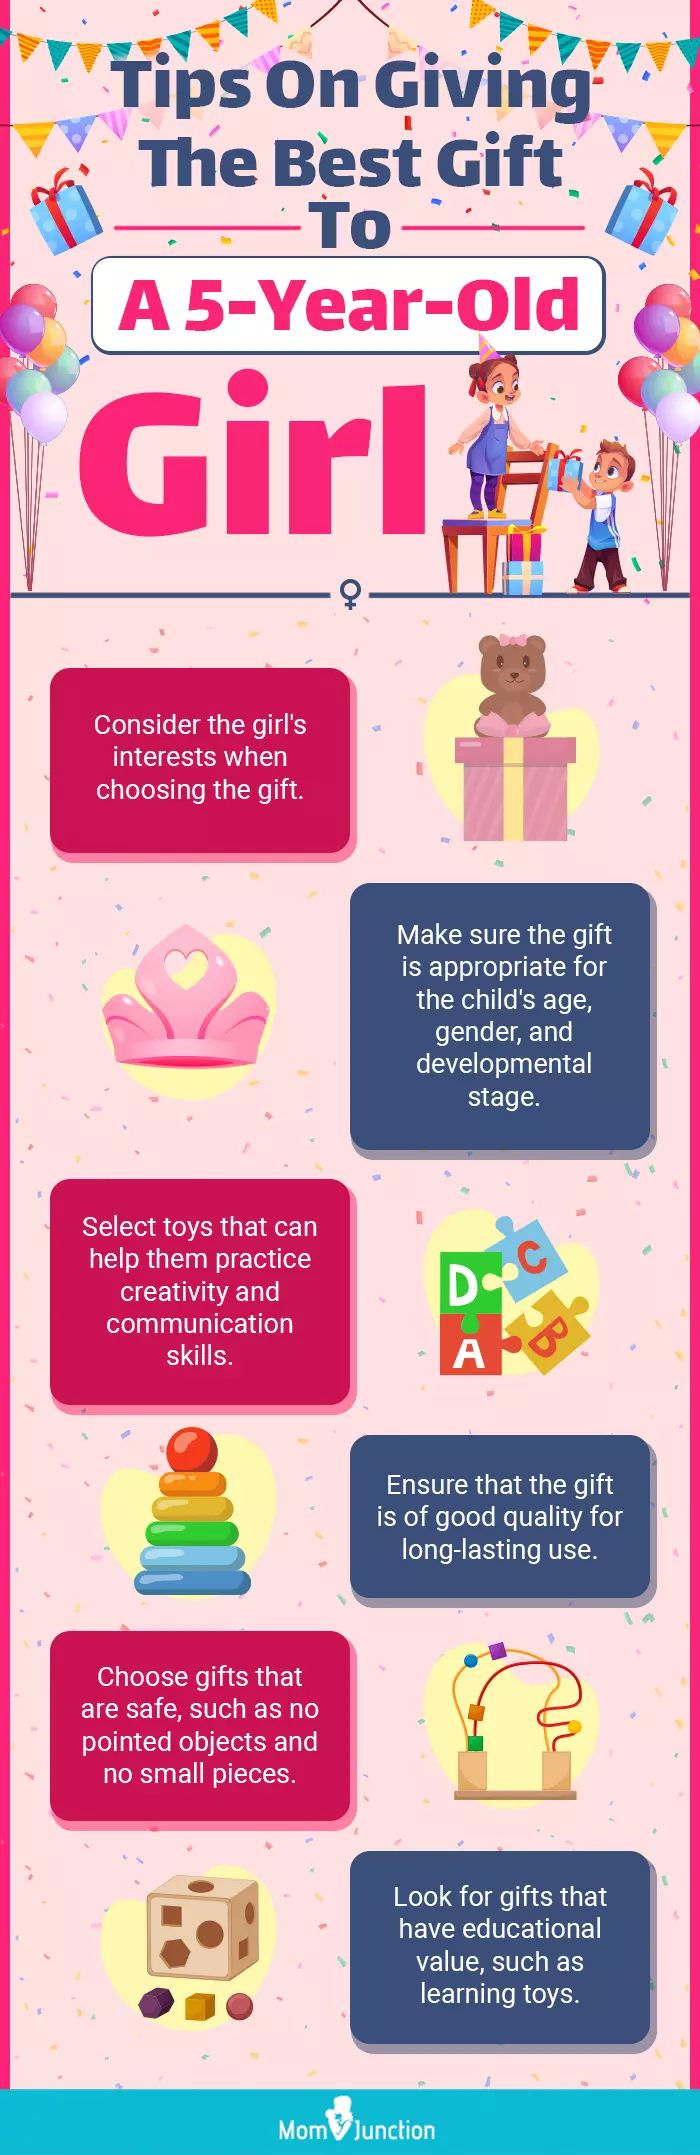 Tips On Giving The Best Gift To A 5-Year-Old Girl (infographic)